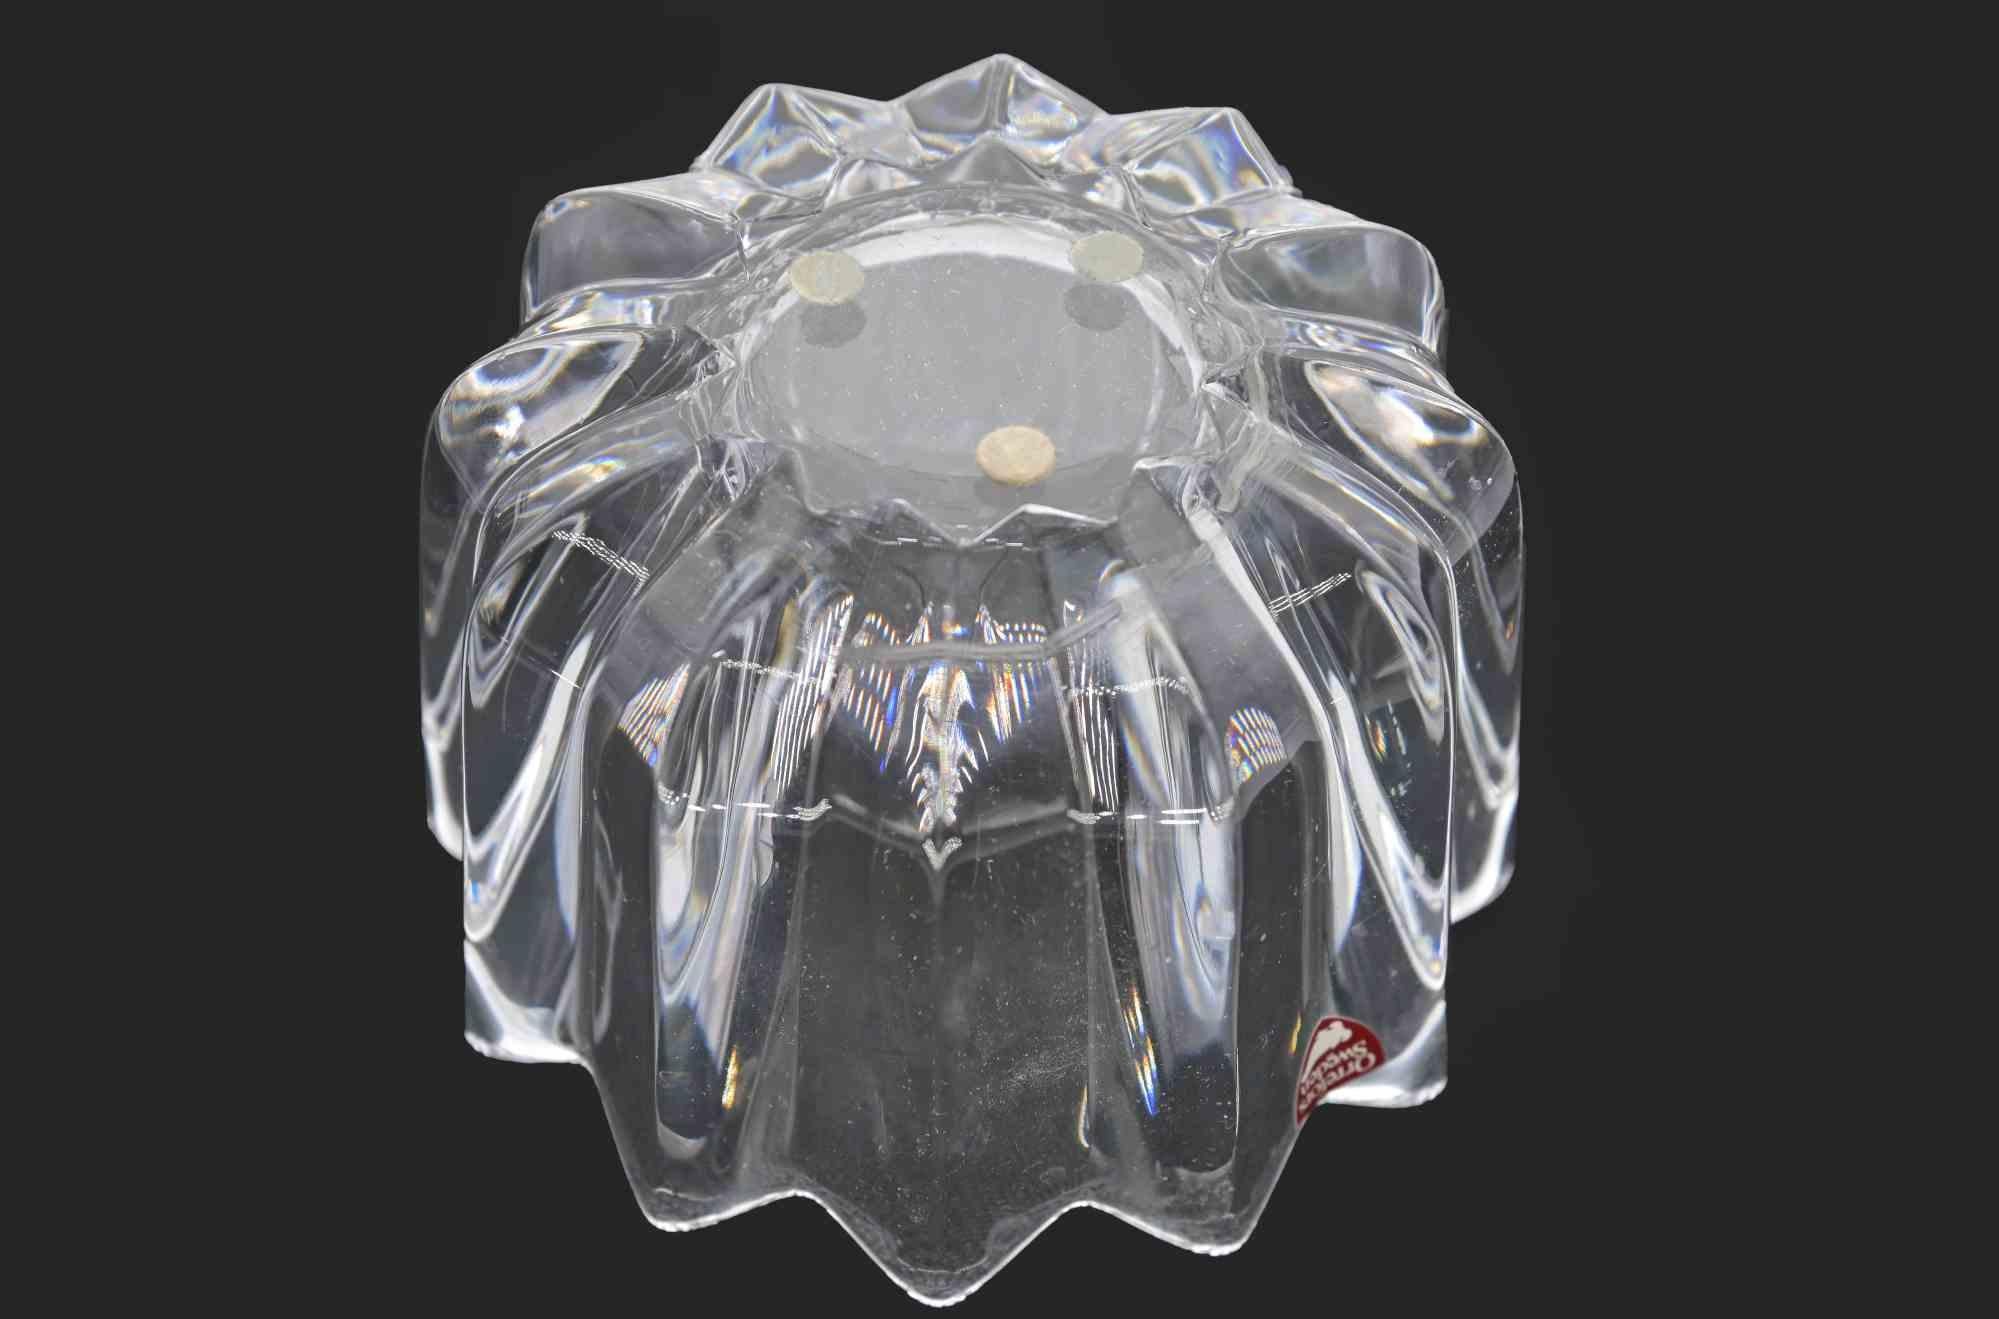 Orrefors sweden jar is a decorative object designed by Orrefors Sweden, in the 1970s. 

Crystal vase, 7,5 x 11 cm.

Very good conditions